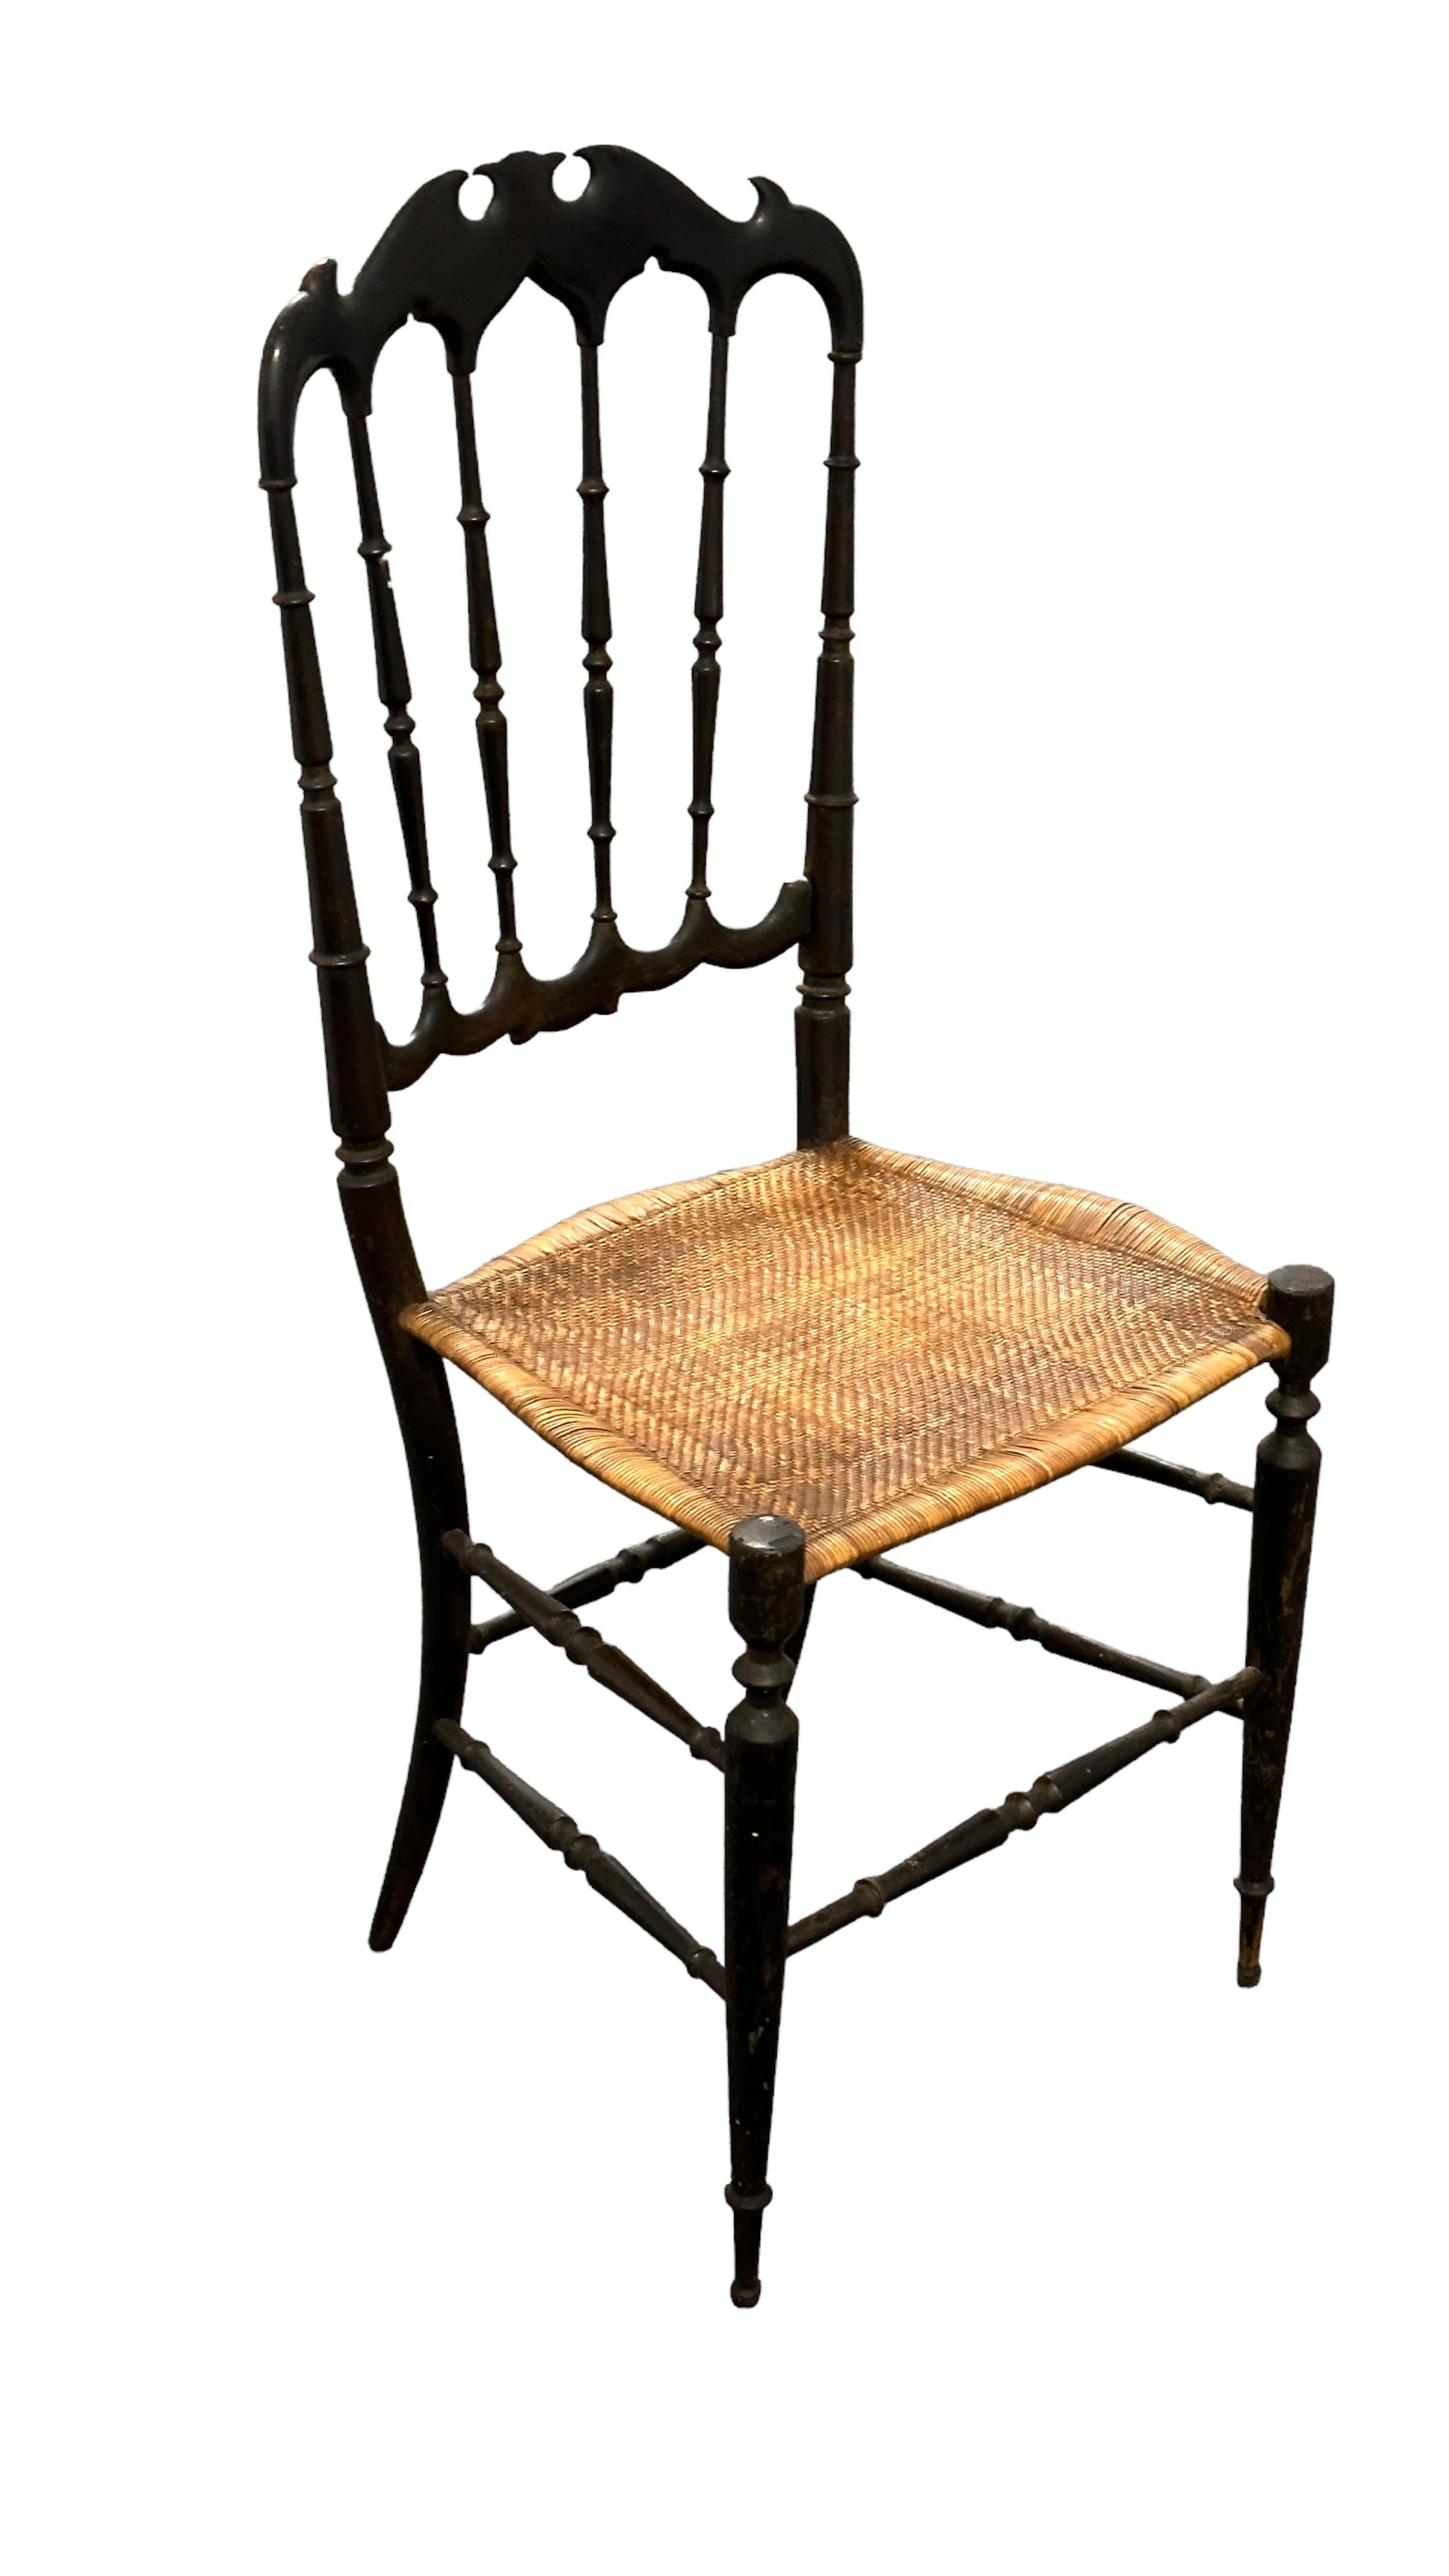 Beautiful Chiavari Wooden Chair Wicker Seat, Made in Liguria, Italy, 1930s For Sale 2